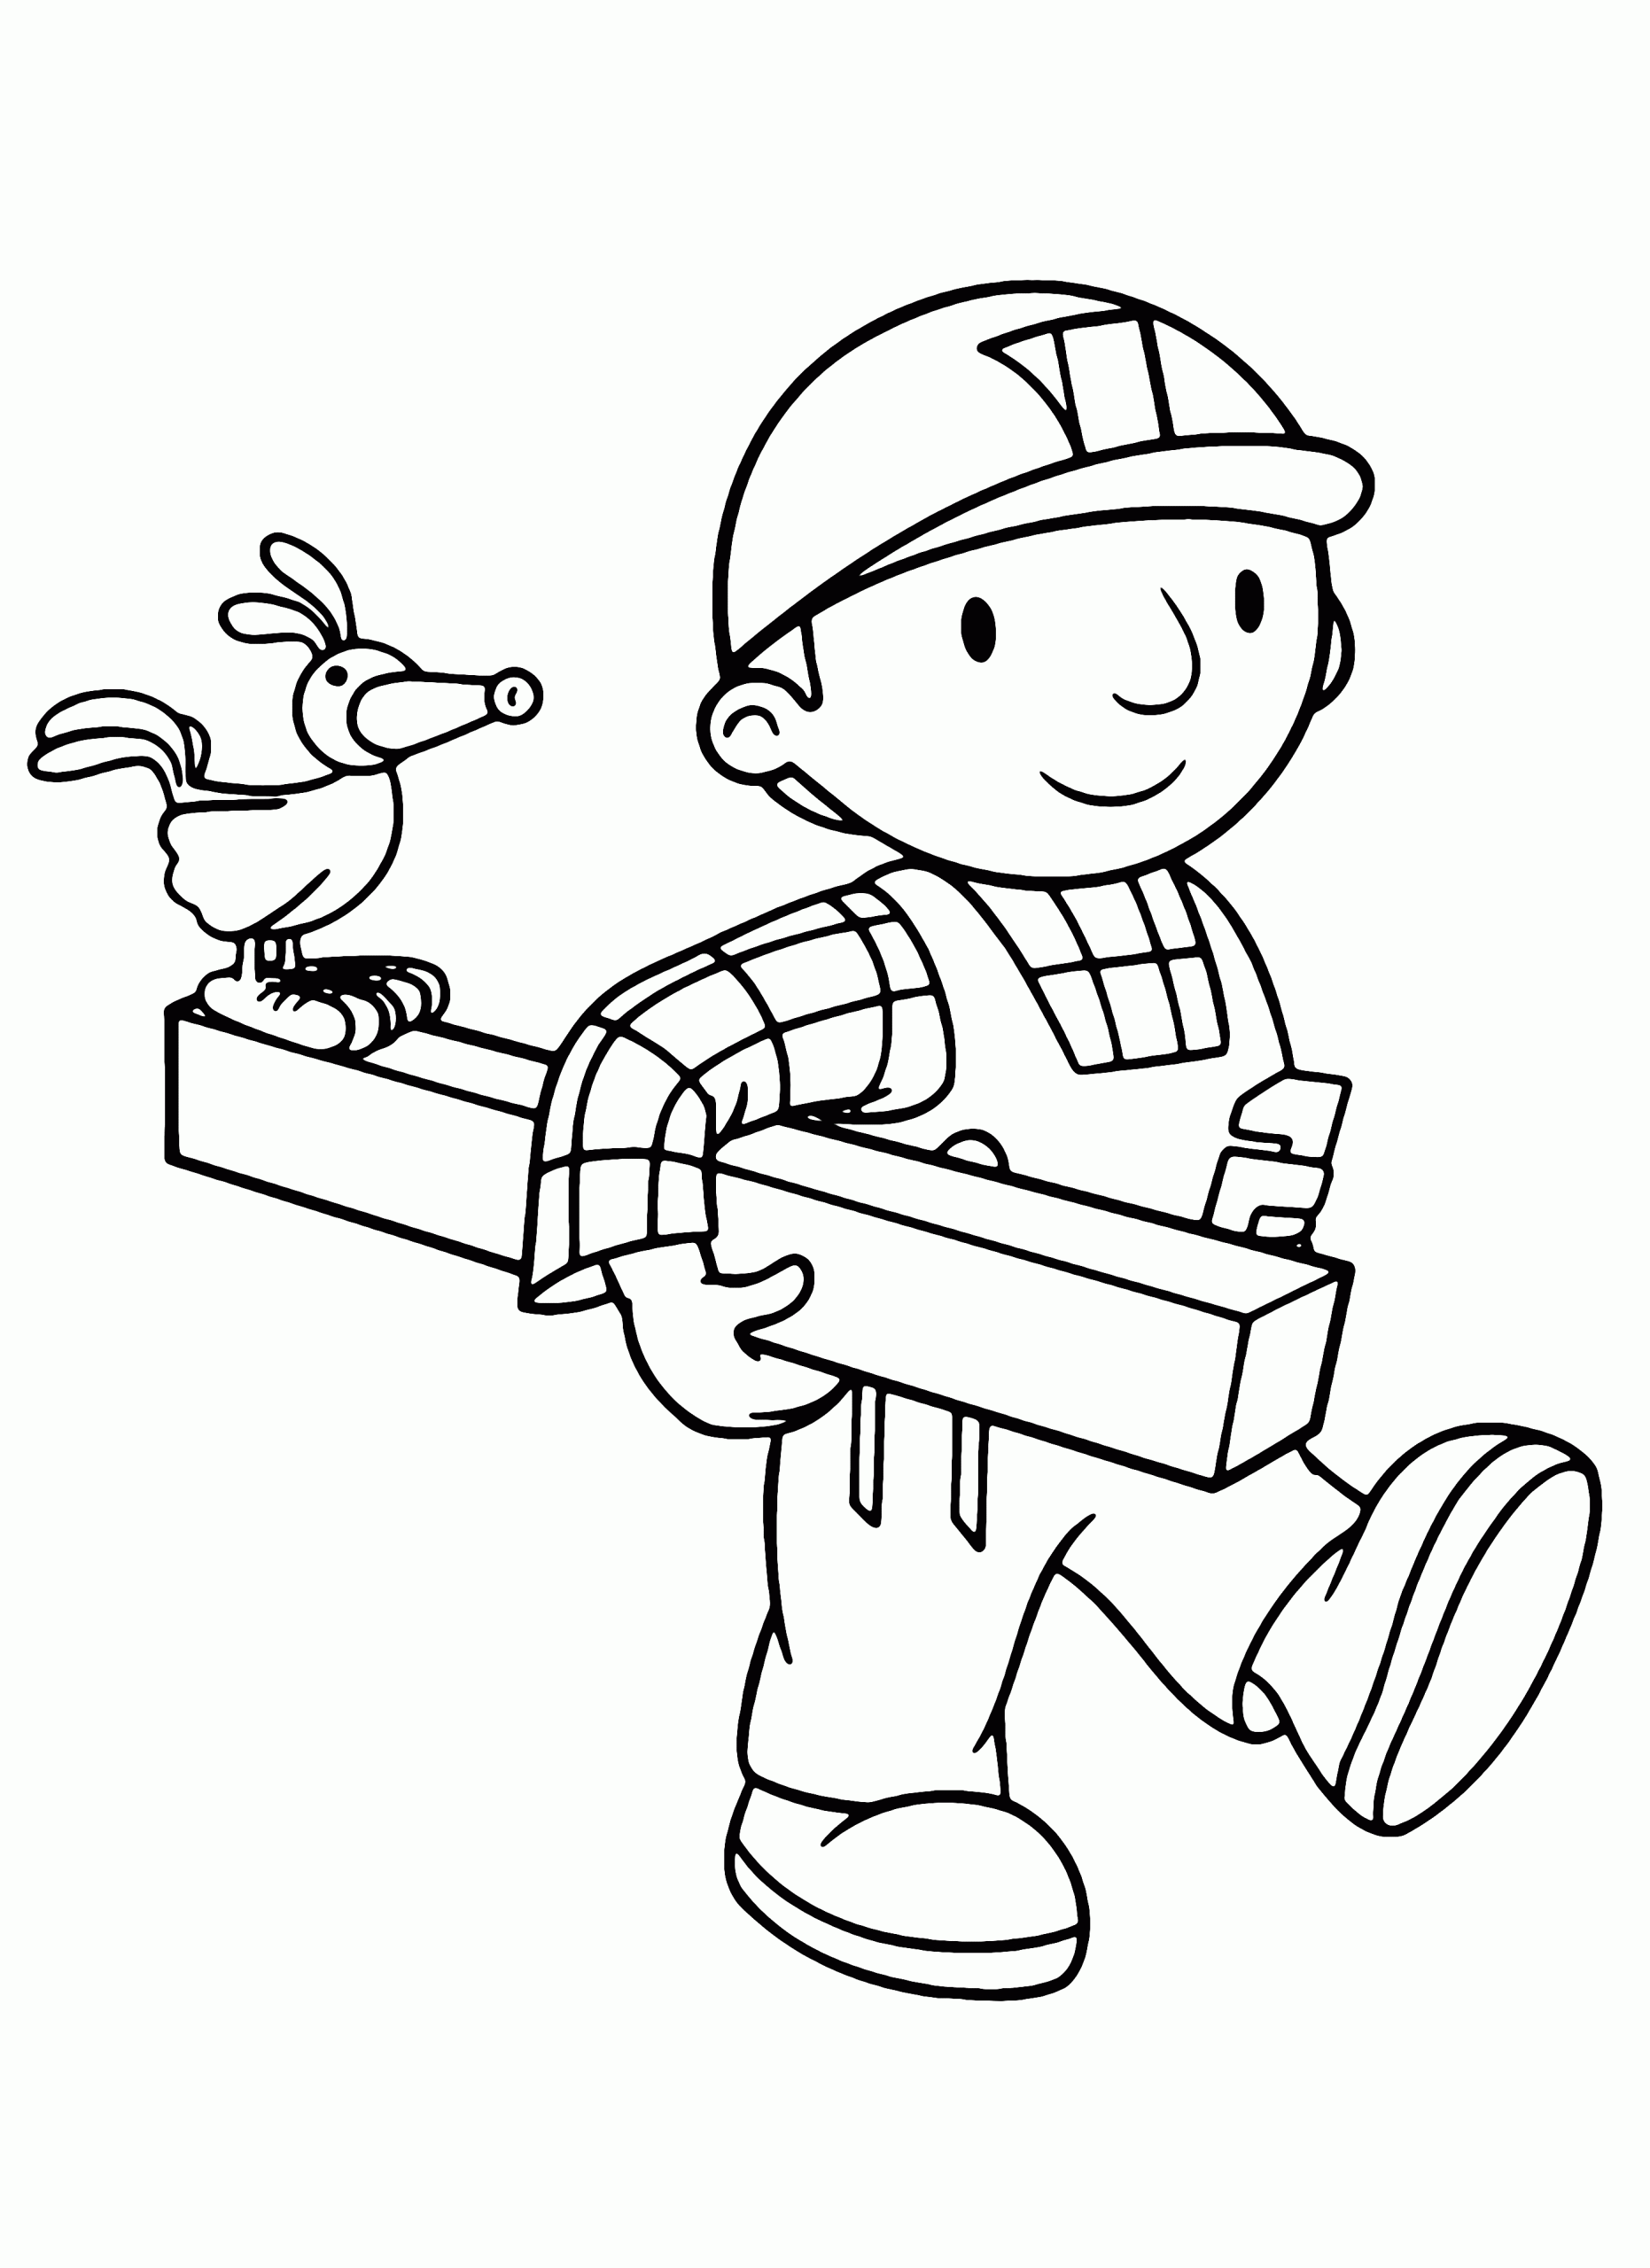 Printable Coloring Page of Bob the Builder on Duty